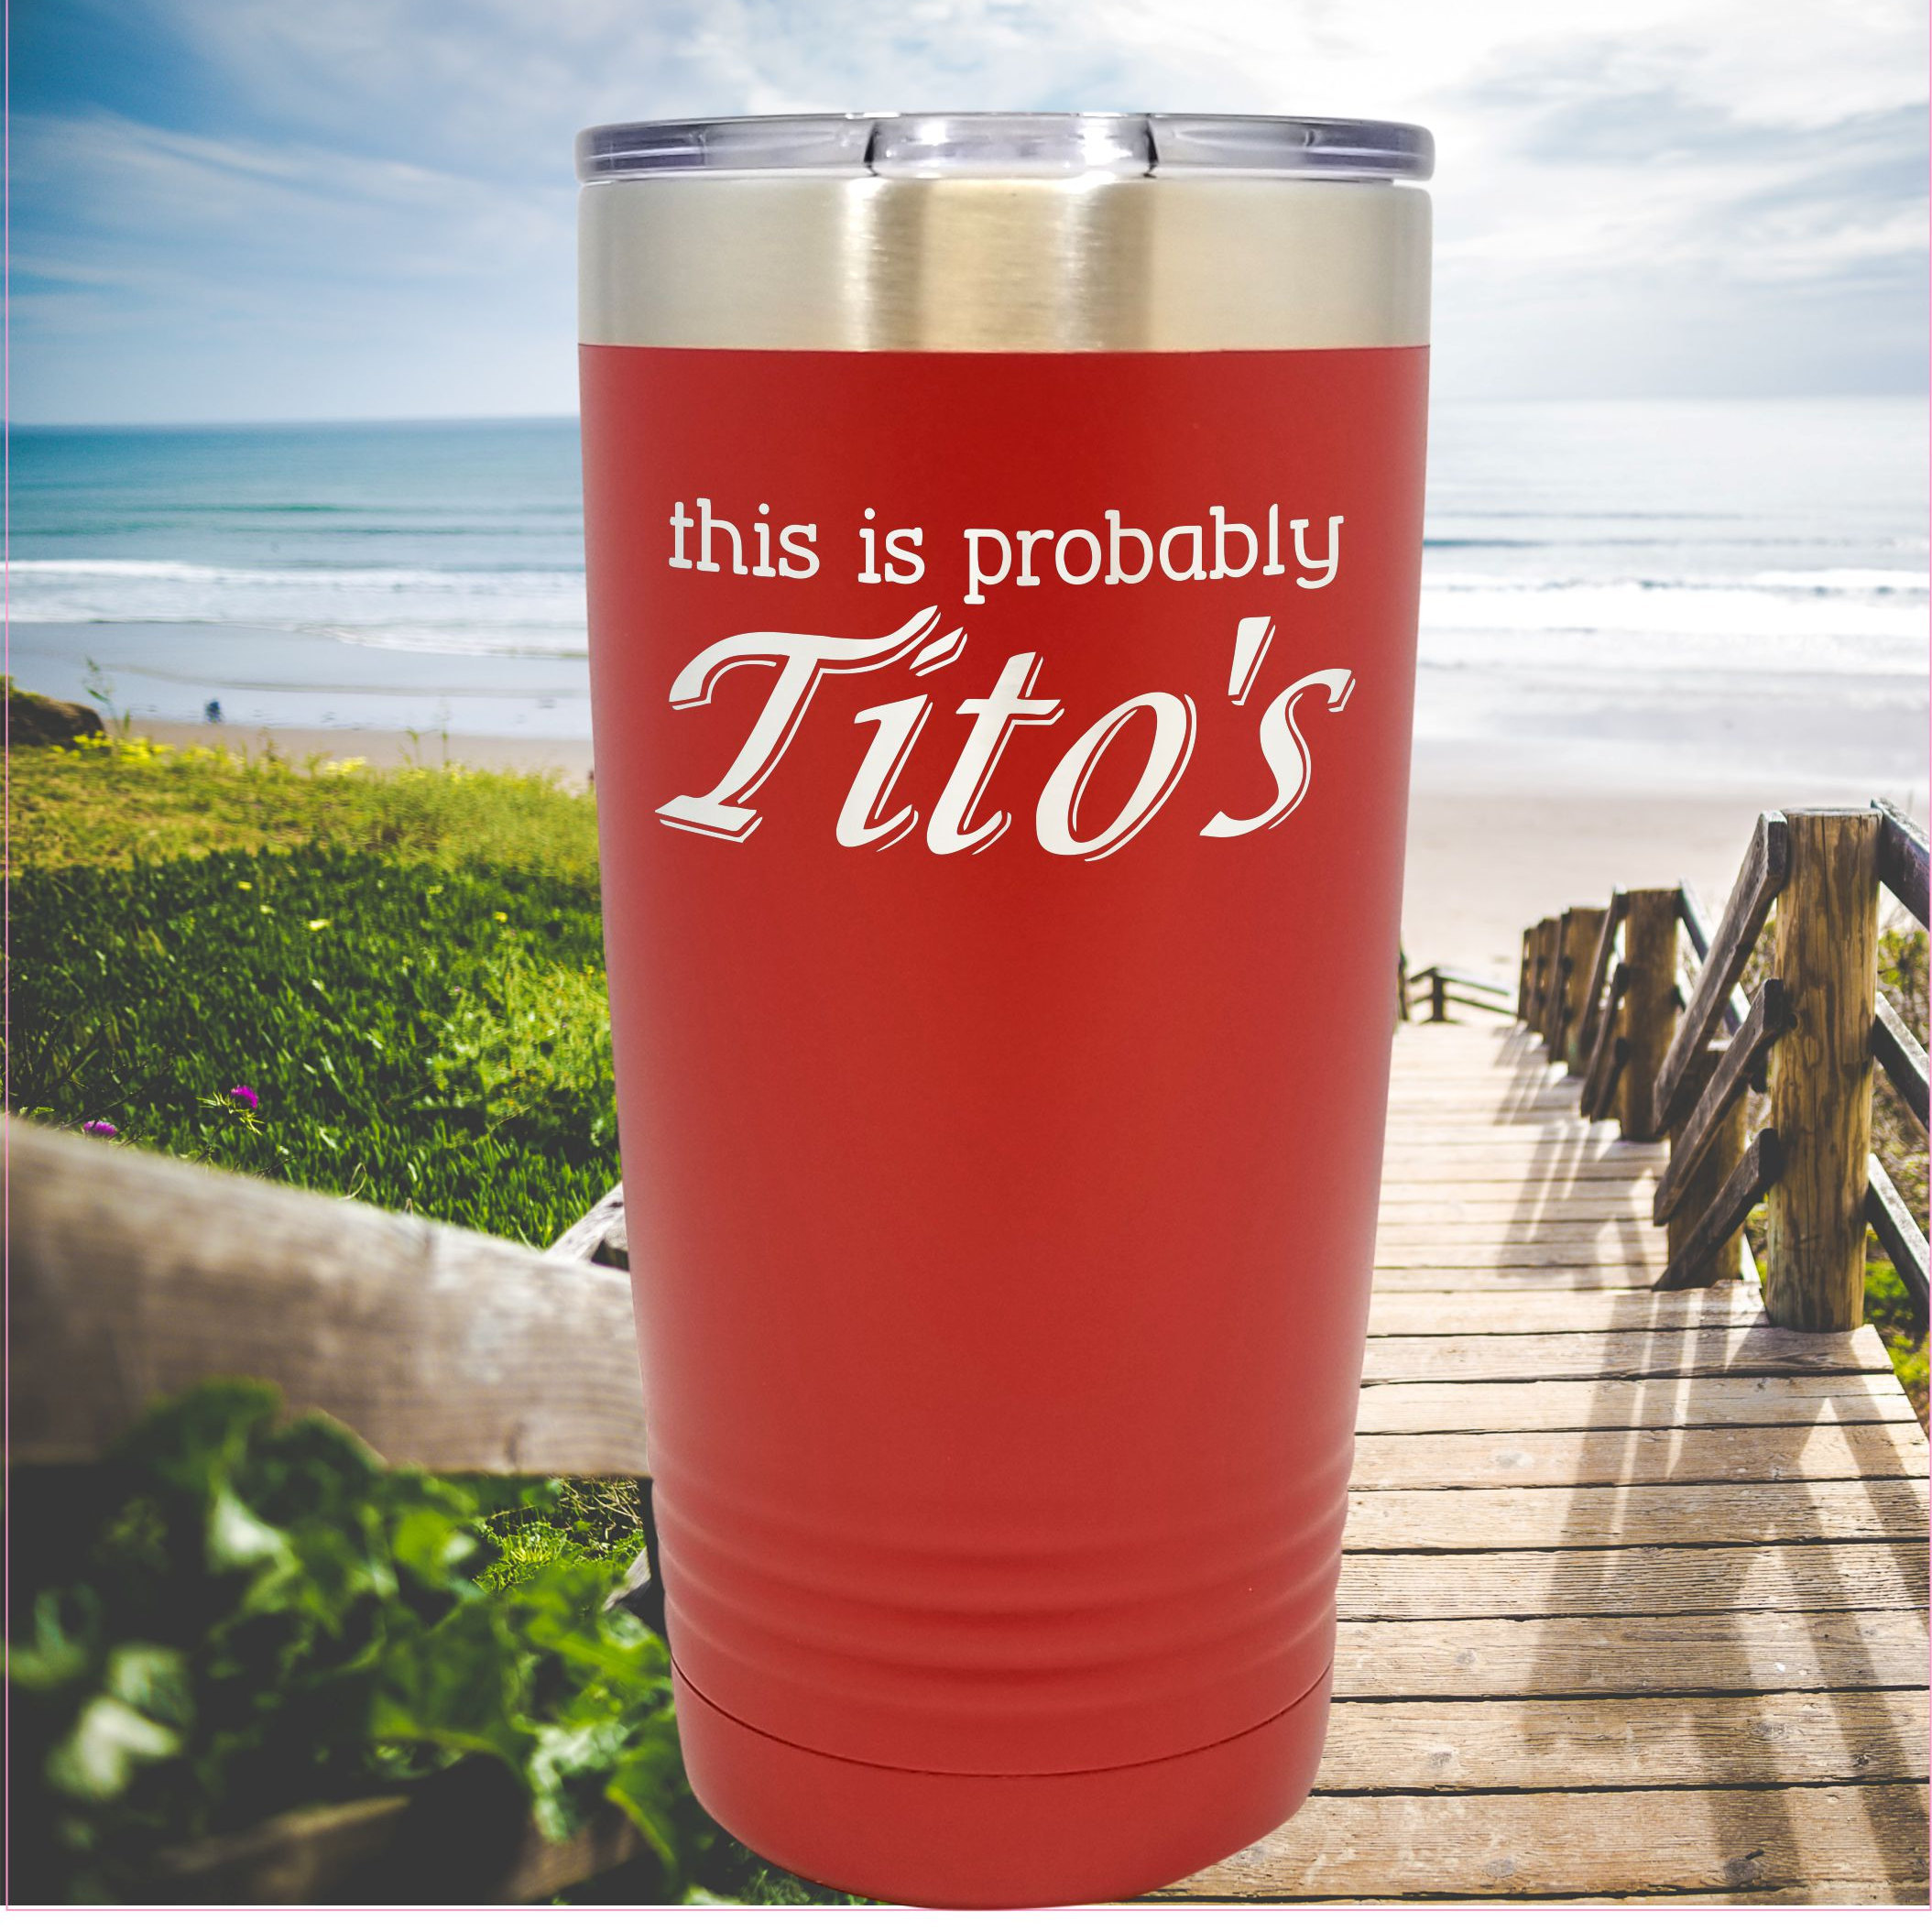 Wine Is The Best Medicine – Engraved Stainless Steel Tumbler